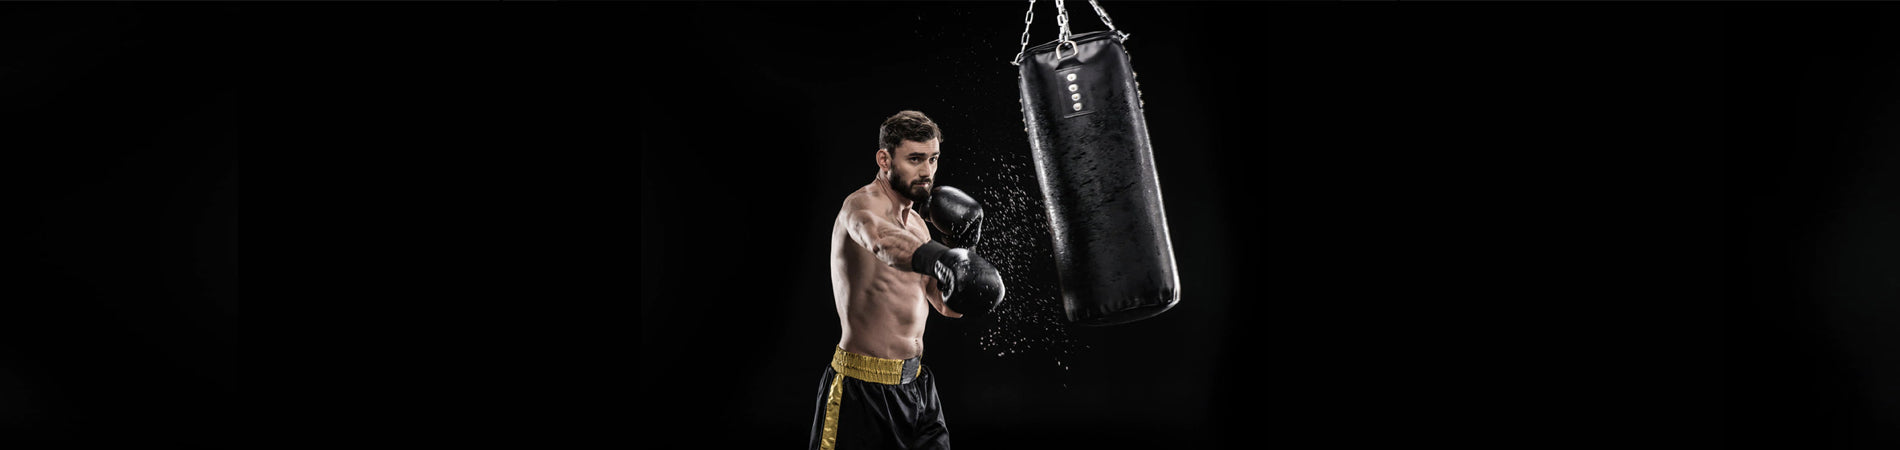 Train Like a Pro: Get in Shape with This Intensive Boxing Workout to Get Yourself Fit